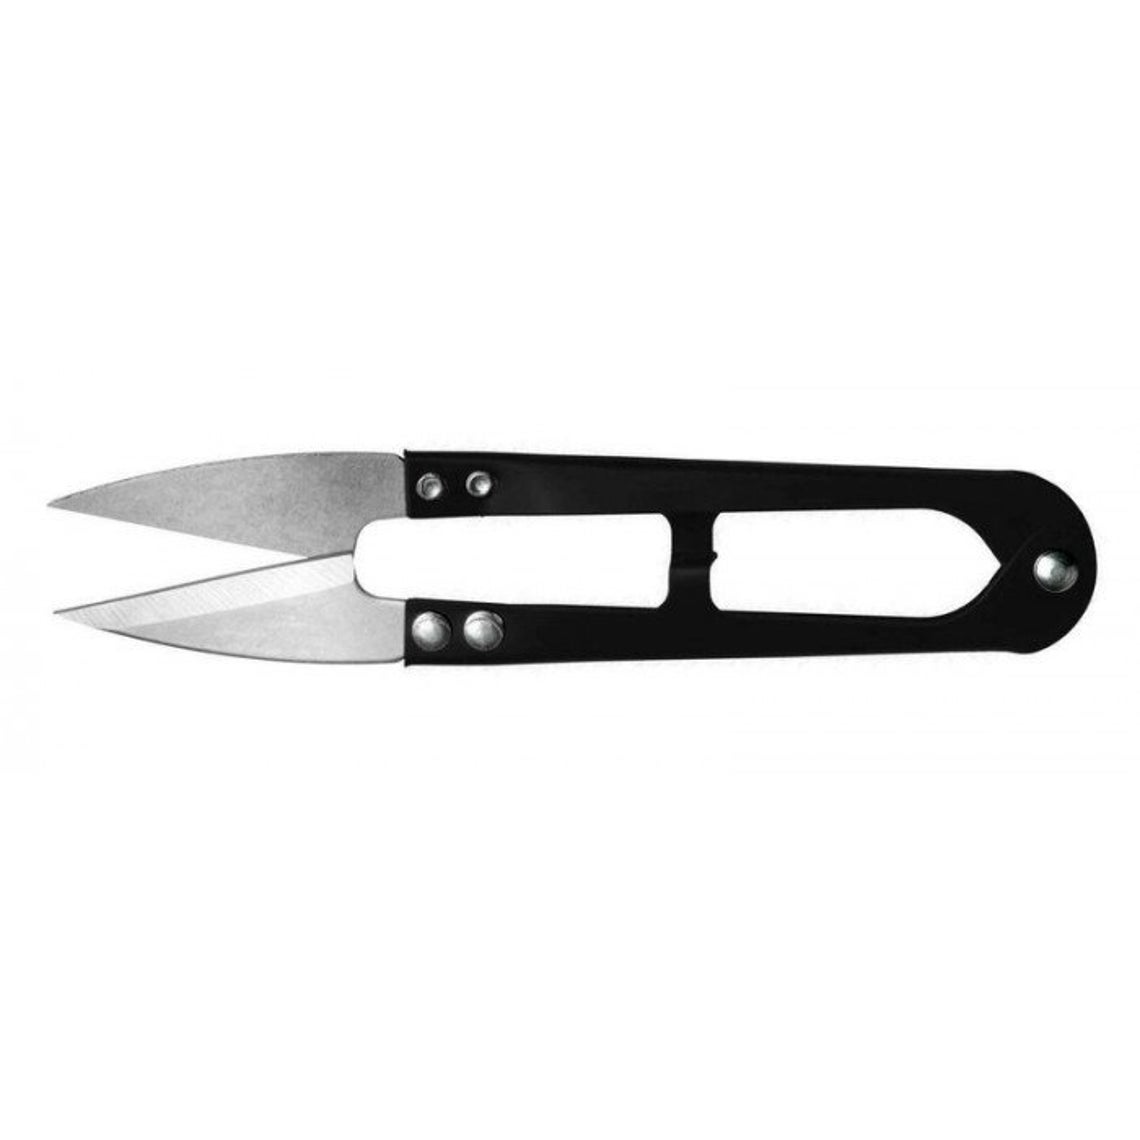 Metal Thread Snips, Black - Fast Delivery